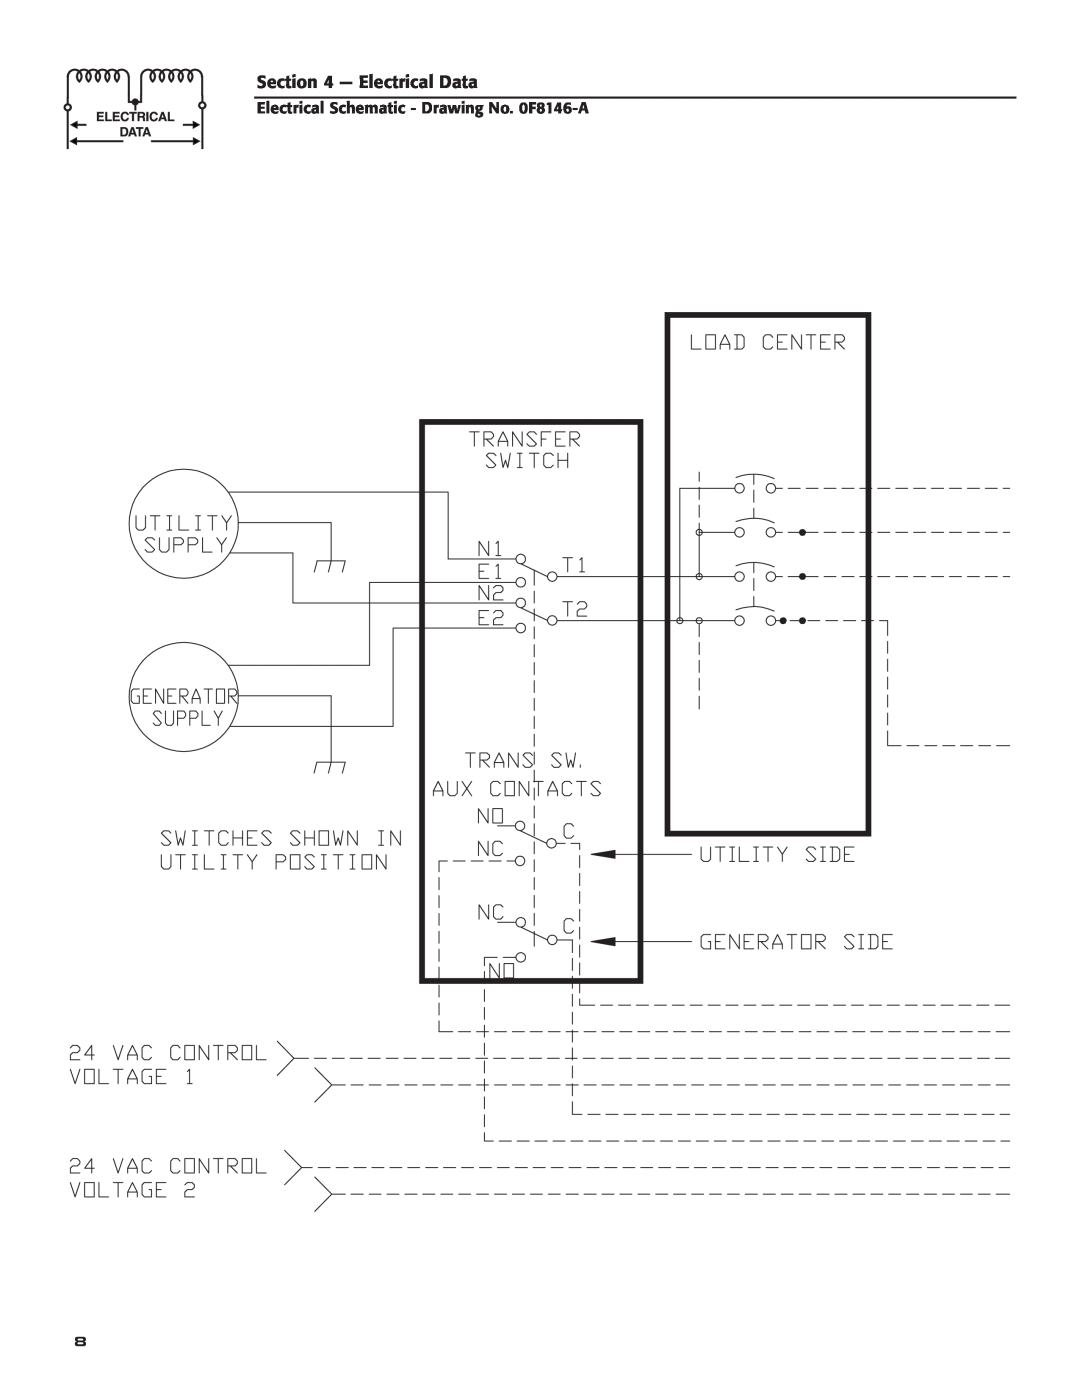 Generac Generator technical manual Electrical Data, Electrical Schematic - Drawing No. 0F8146-A 